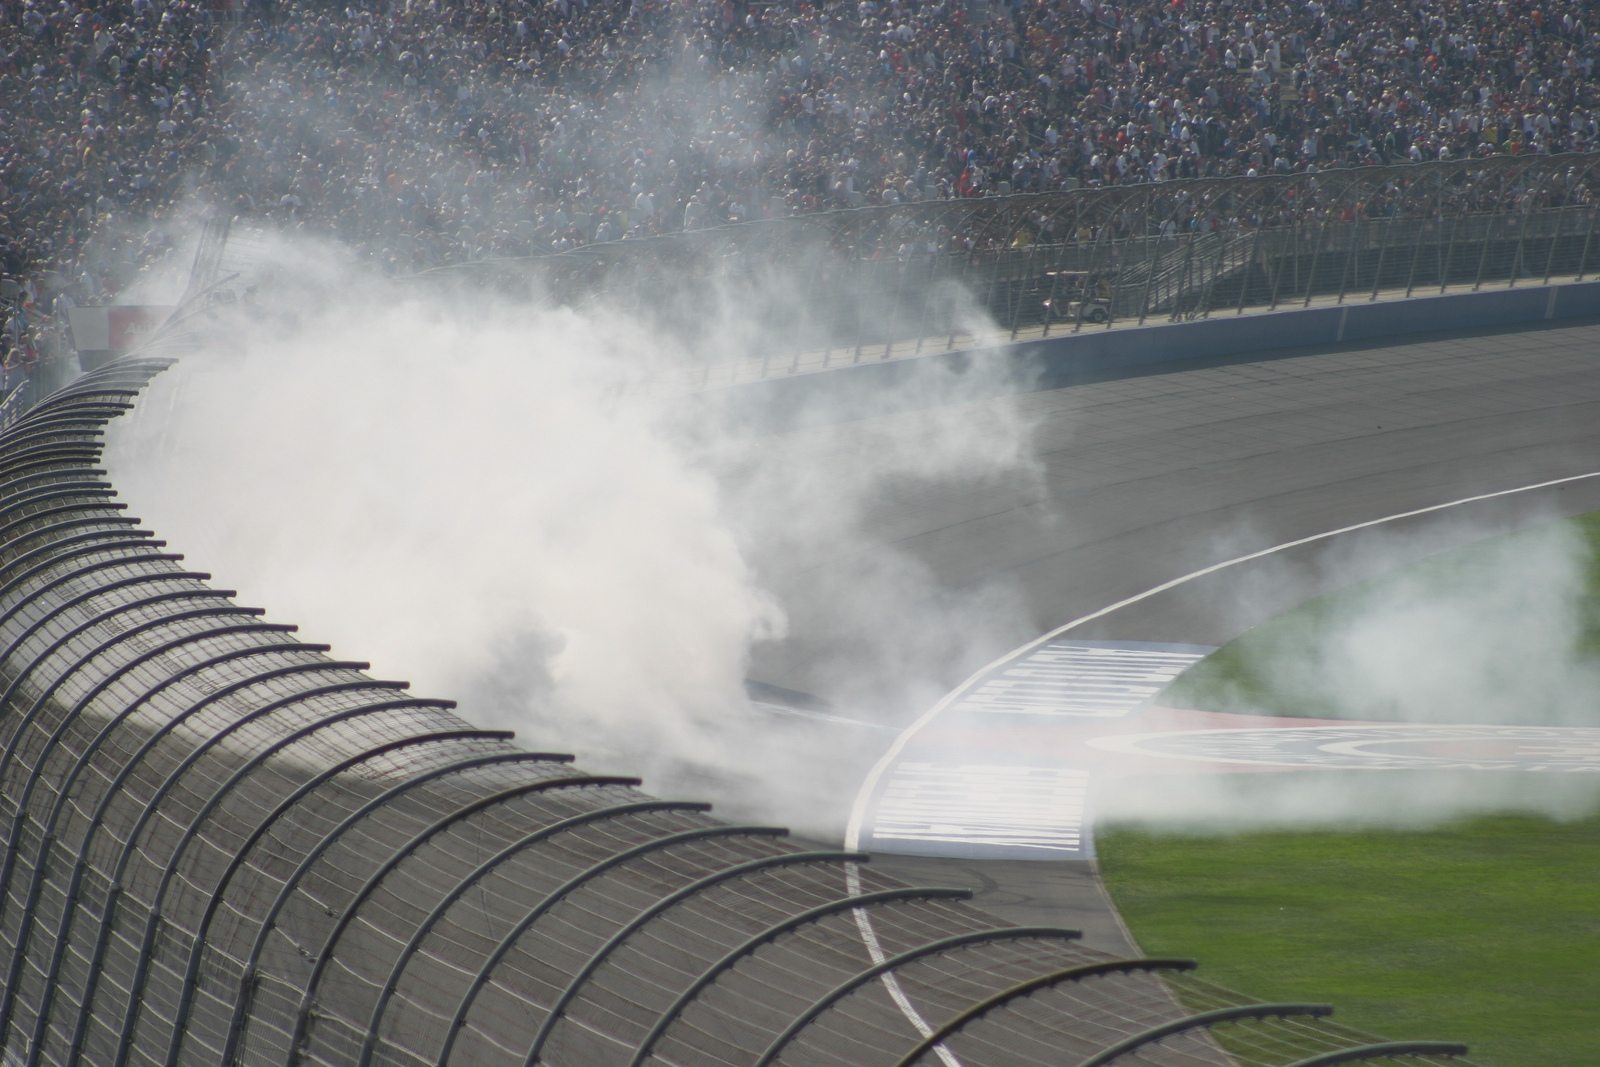  ​Busch's victory burn-out 